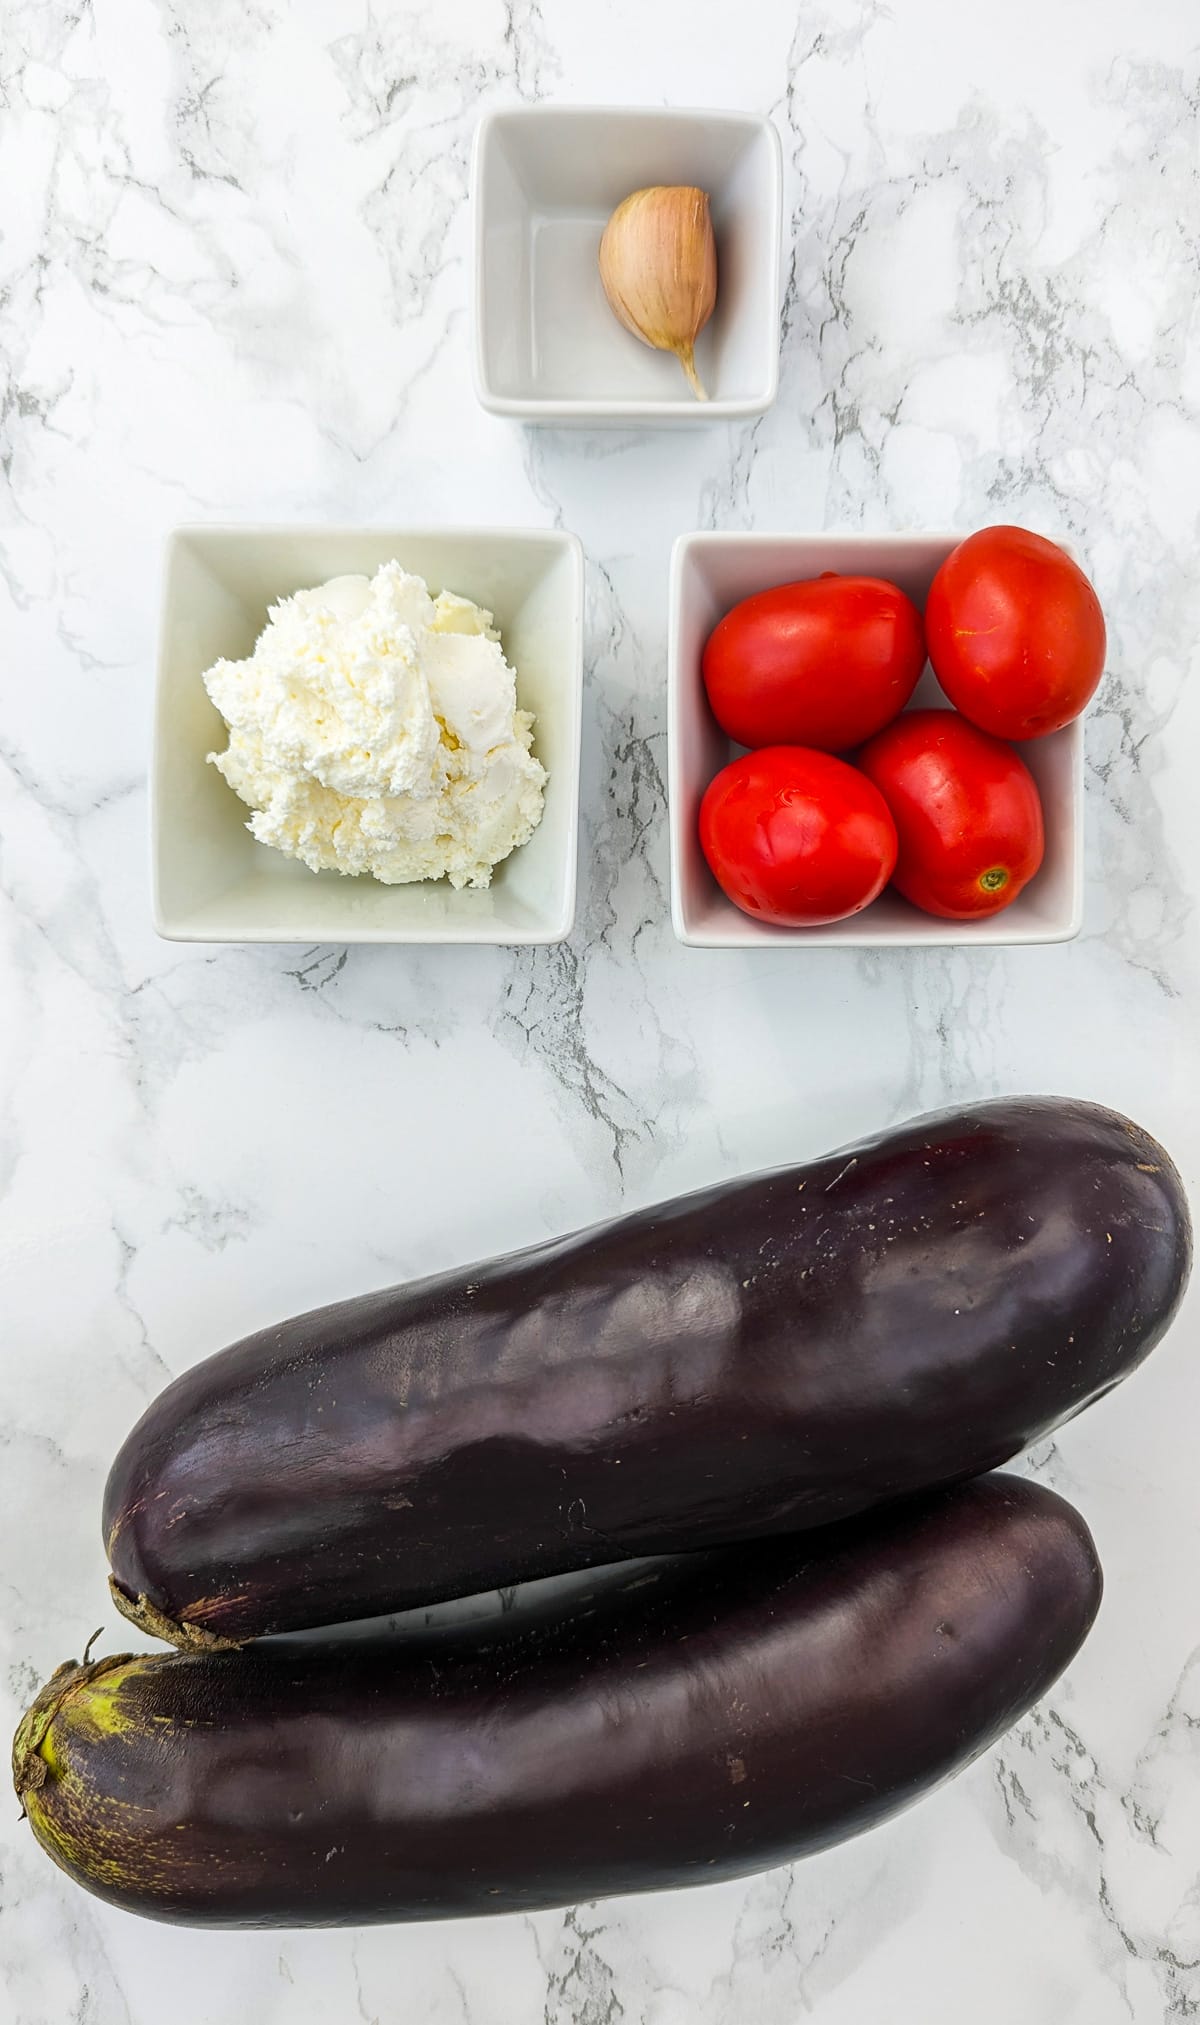 Top view of 2 large eggplants near 4 tomatoes, cream cheese and garlic clove.